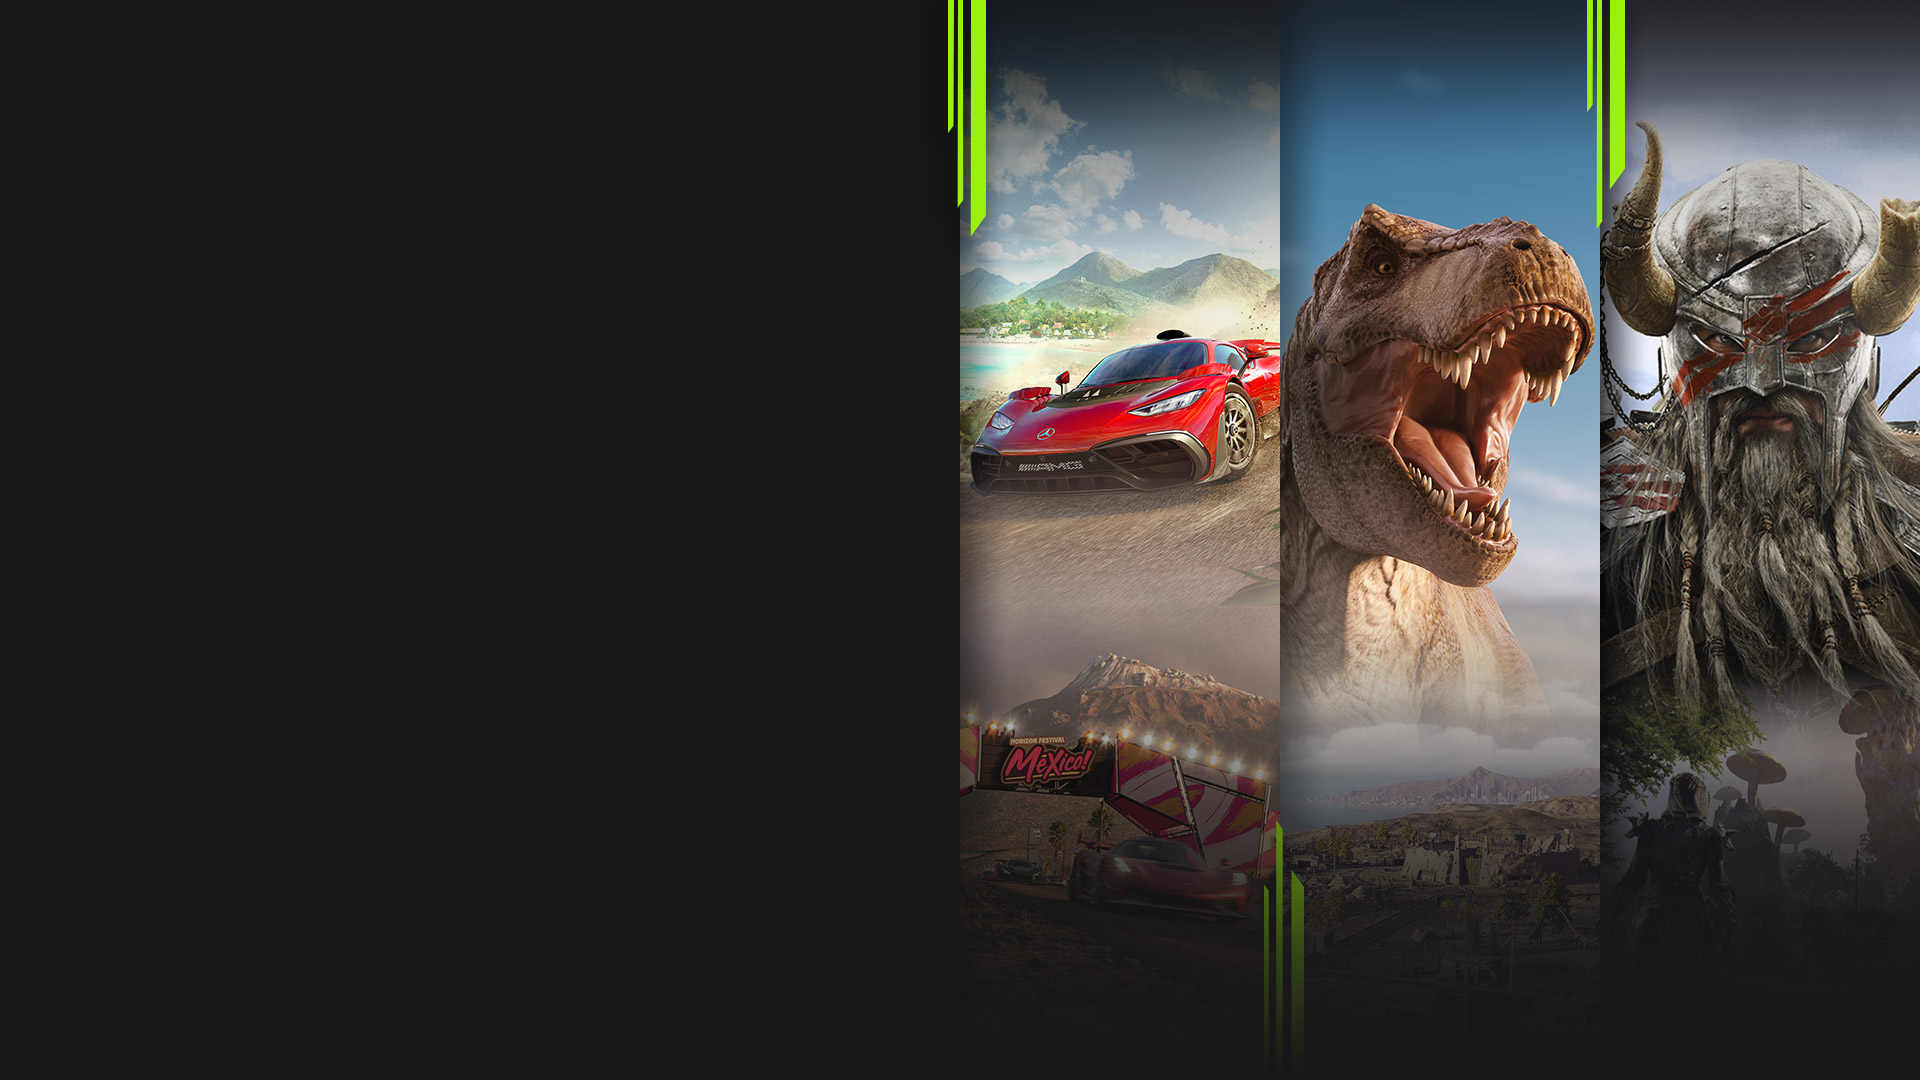 Game art from multiple games available now with Xbox Game Pass including Forza Horizon 5, Jurassic World Evolution 2, The Elder Scrolls Online, and Halo Infinite.